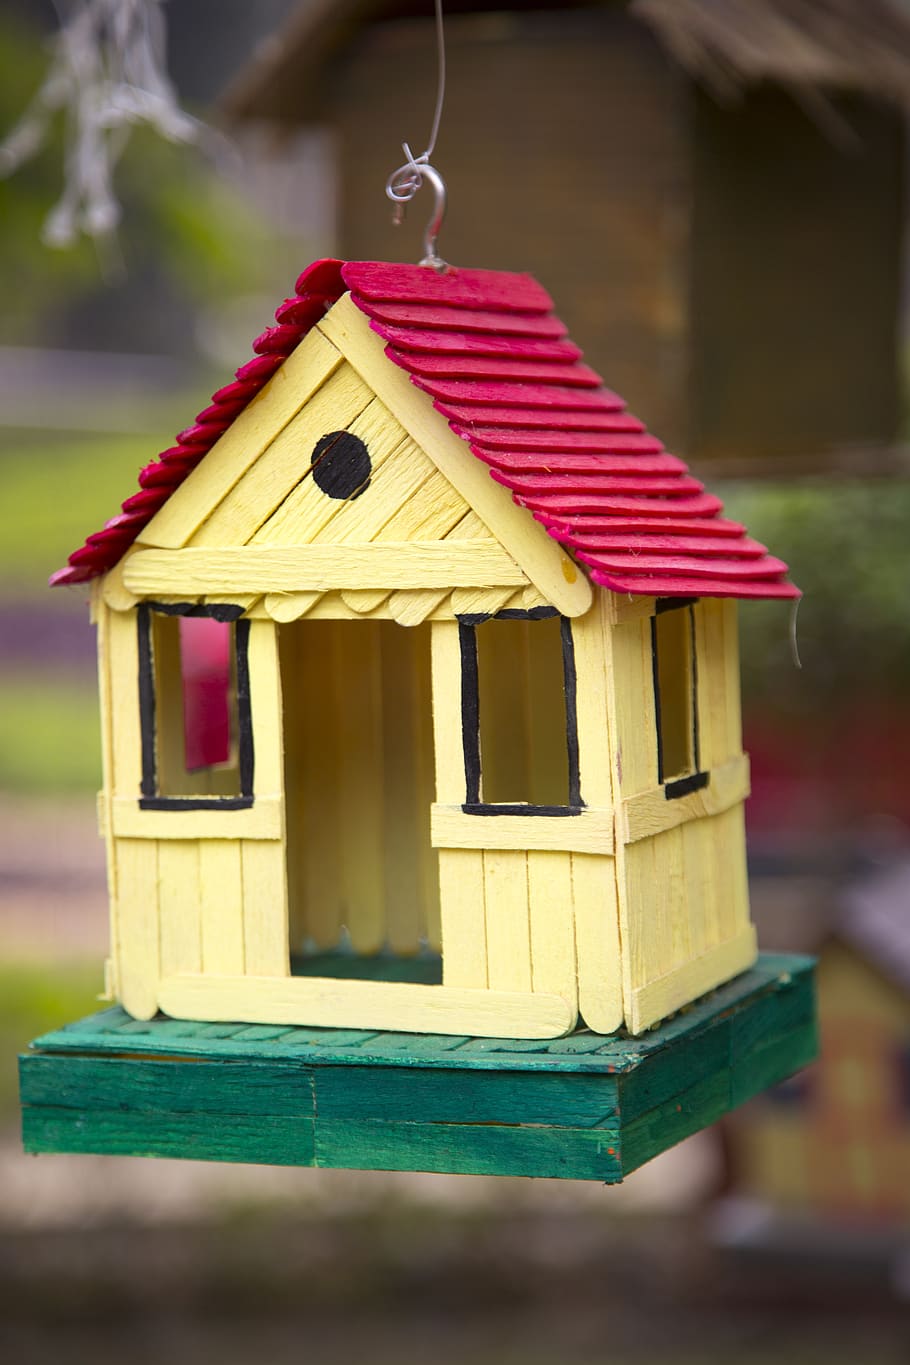 birdhouse, house, family, nest, wood, wooden, shelter, nature, toy, architecture